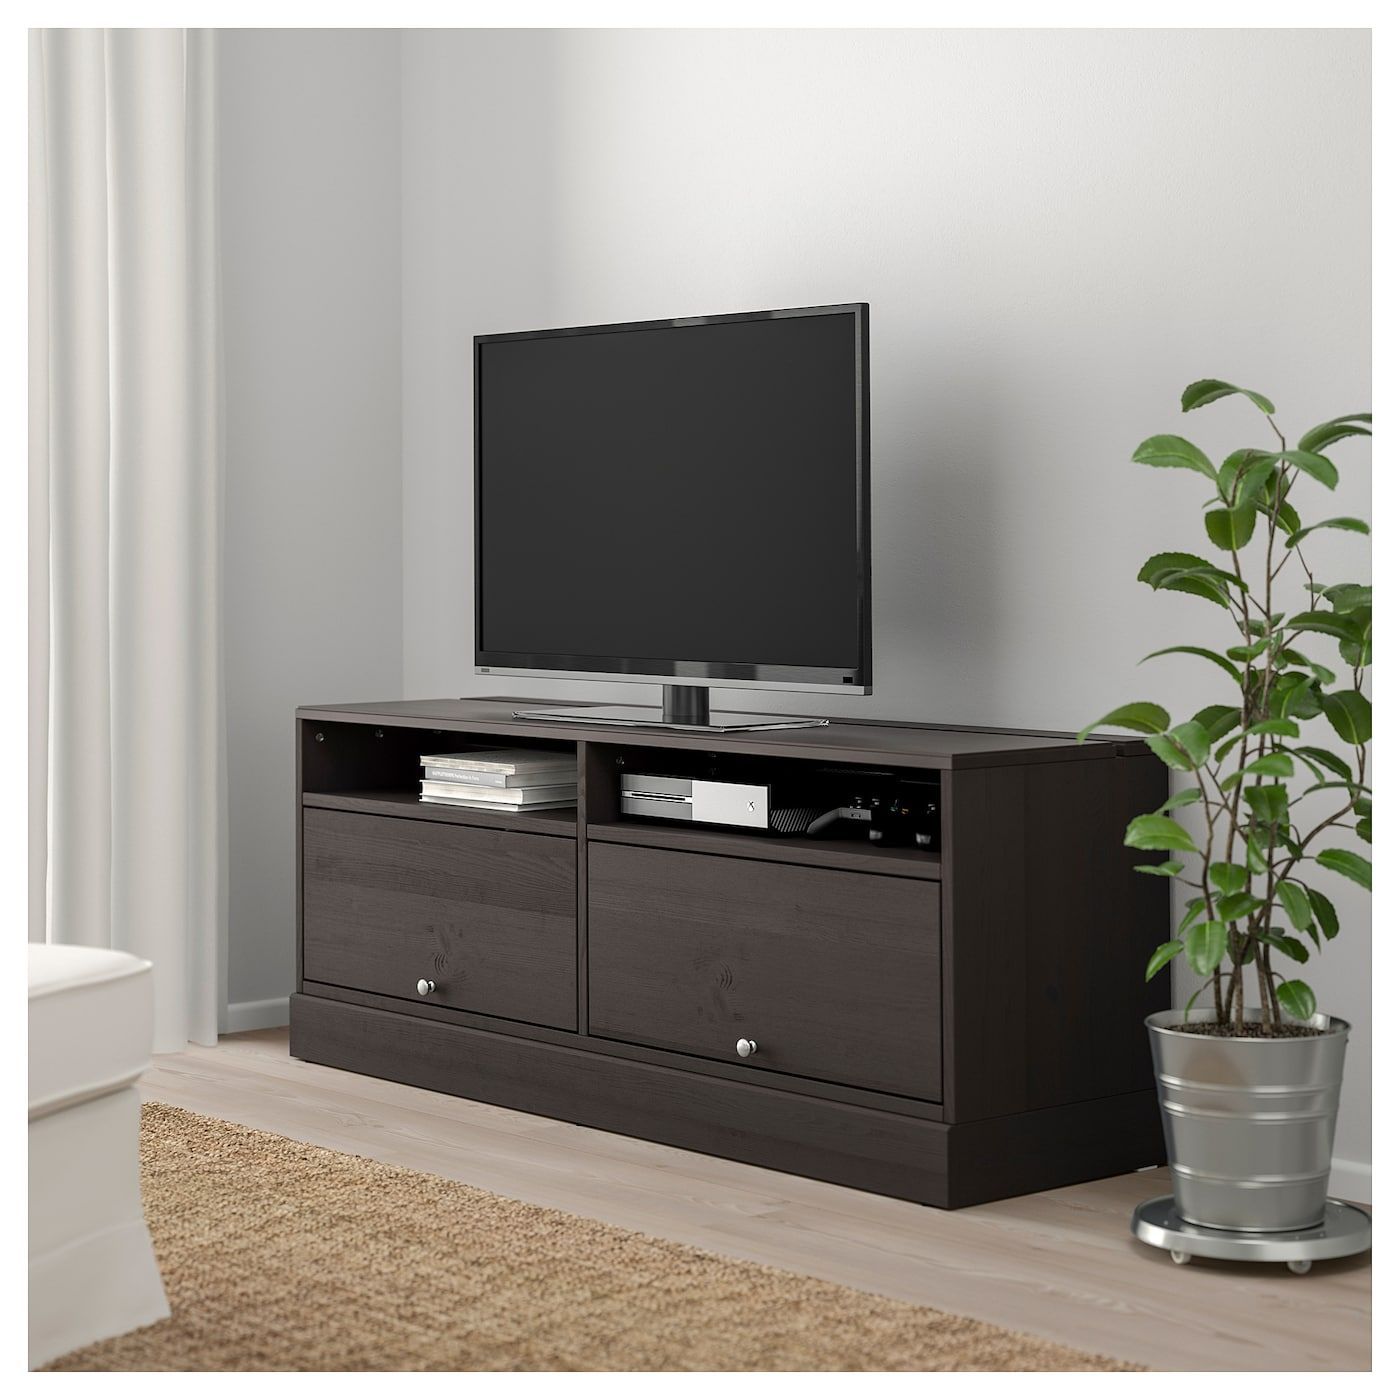 Ikea – Havsta Tv Unit With Base Dark Brown | Tv Unit, Ikea With Tv Bench Unit (View 3 of 15)